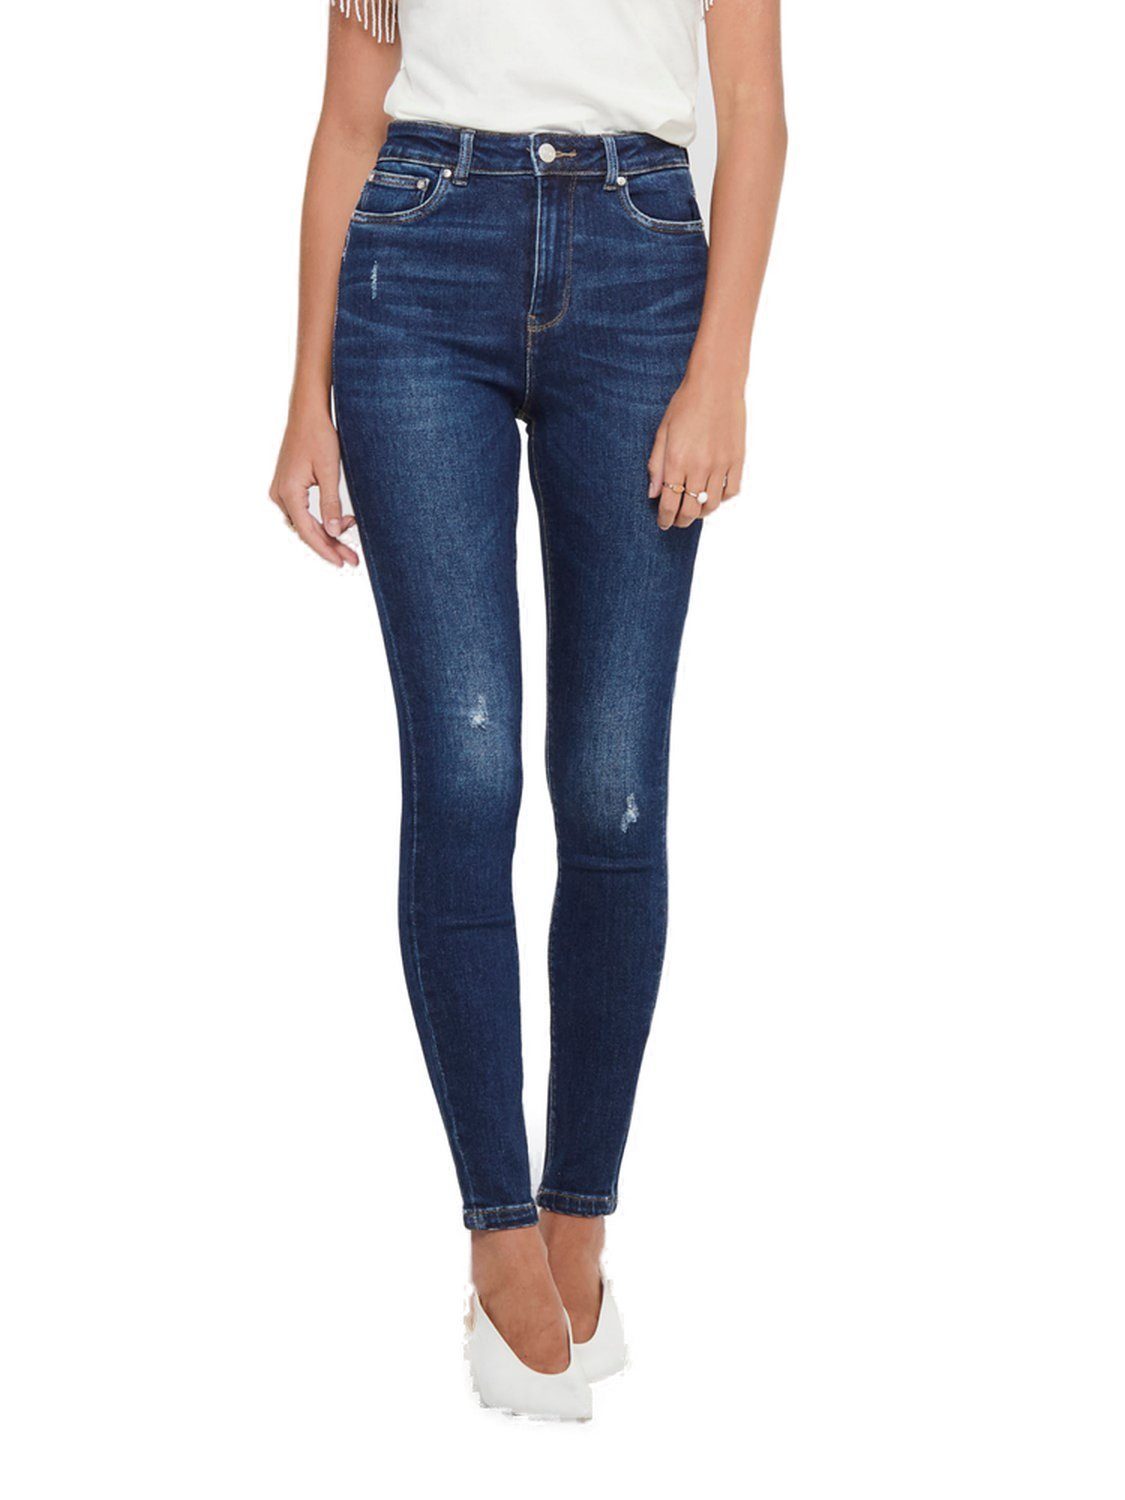 ONLY Skinny-fit-Jeans ONLMILA HW SK ANK BJ374 mit Stretch